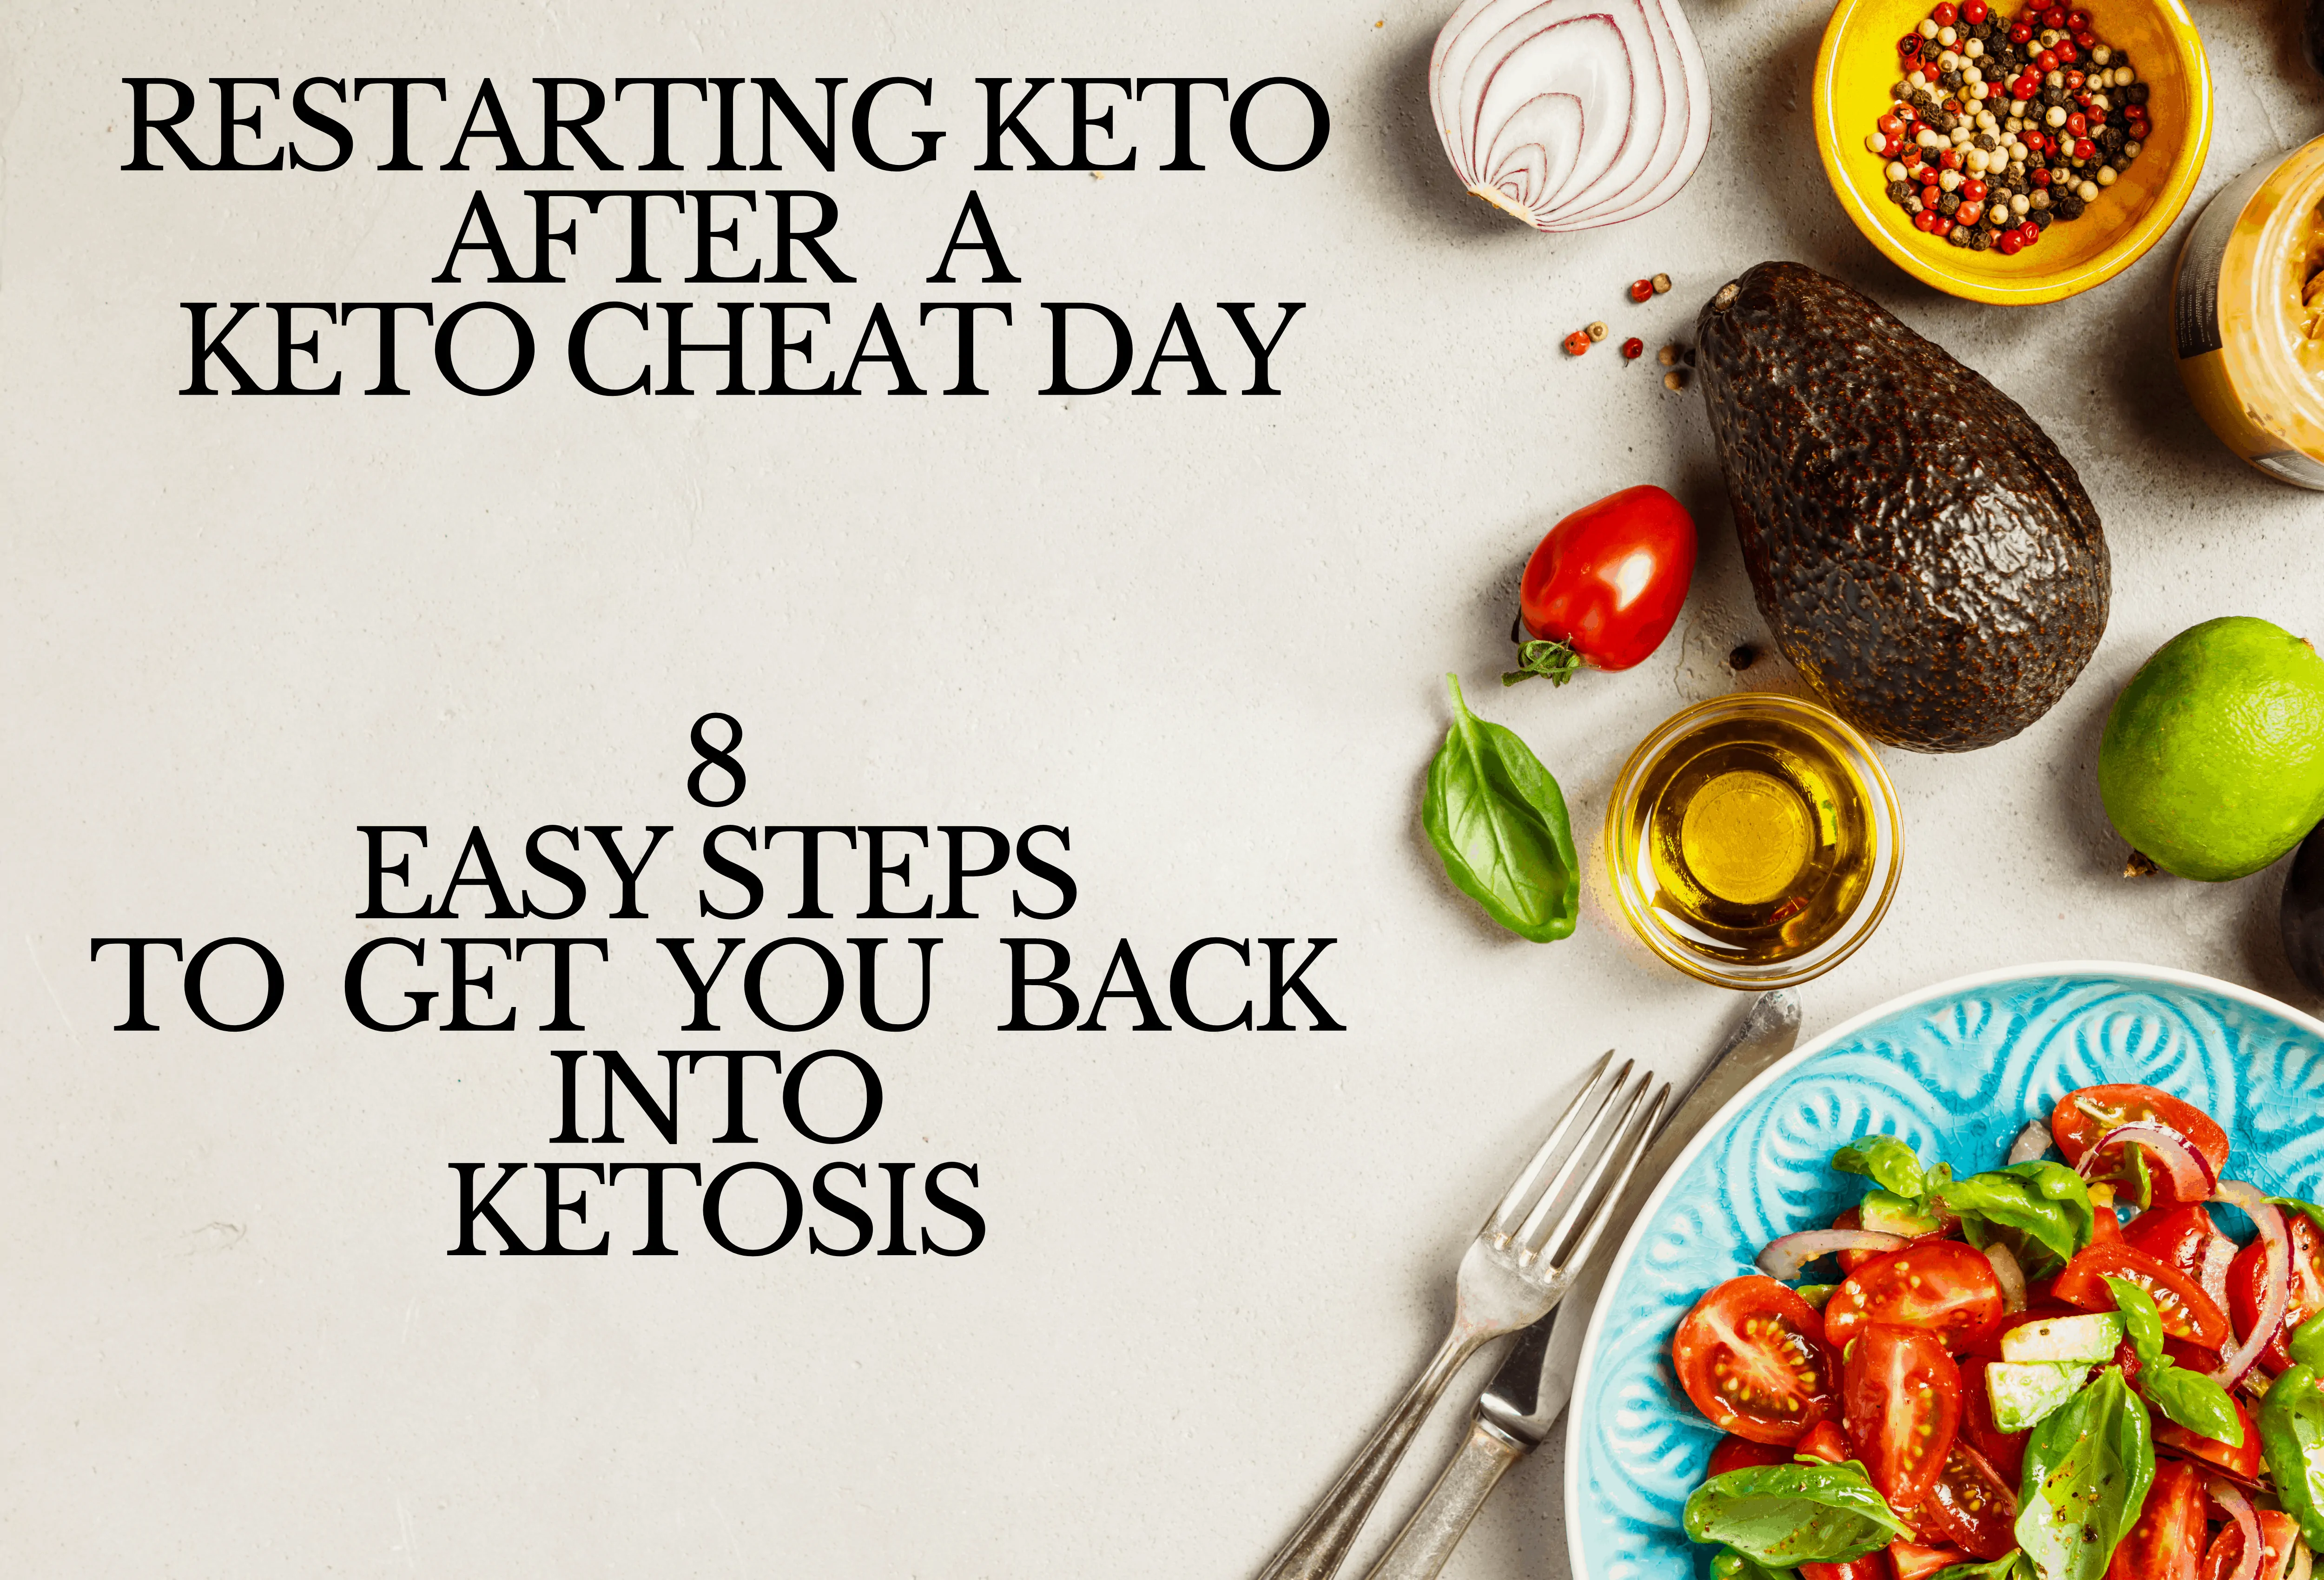 8 steps to restarting keto after a keto cheat day